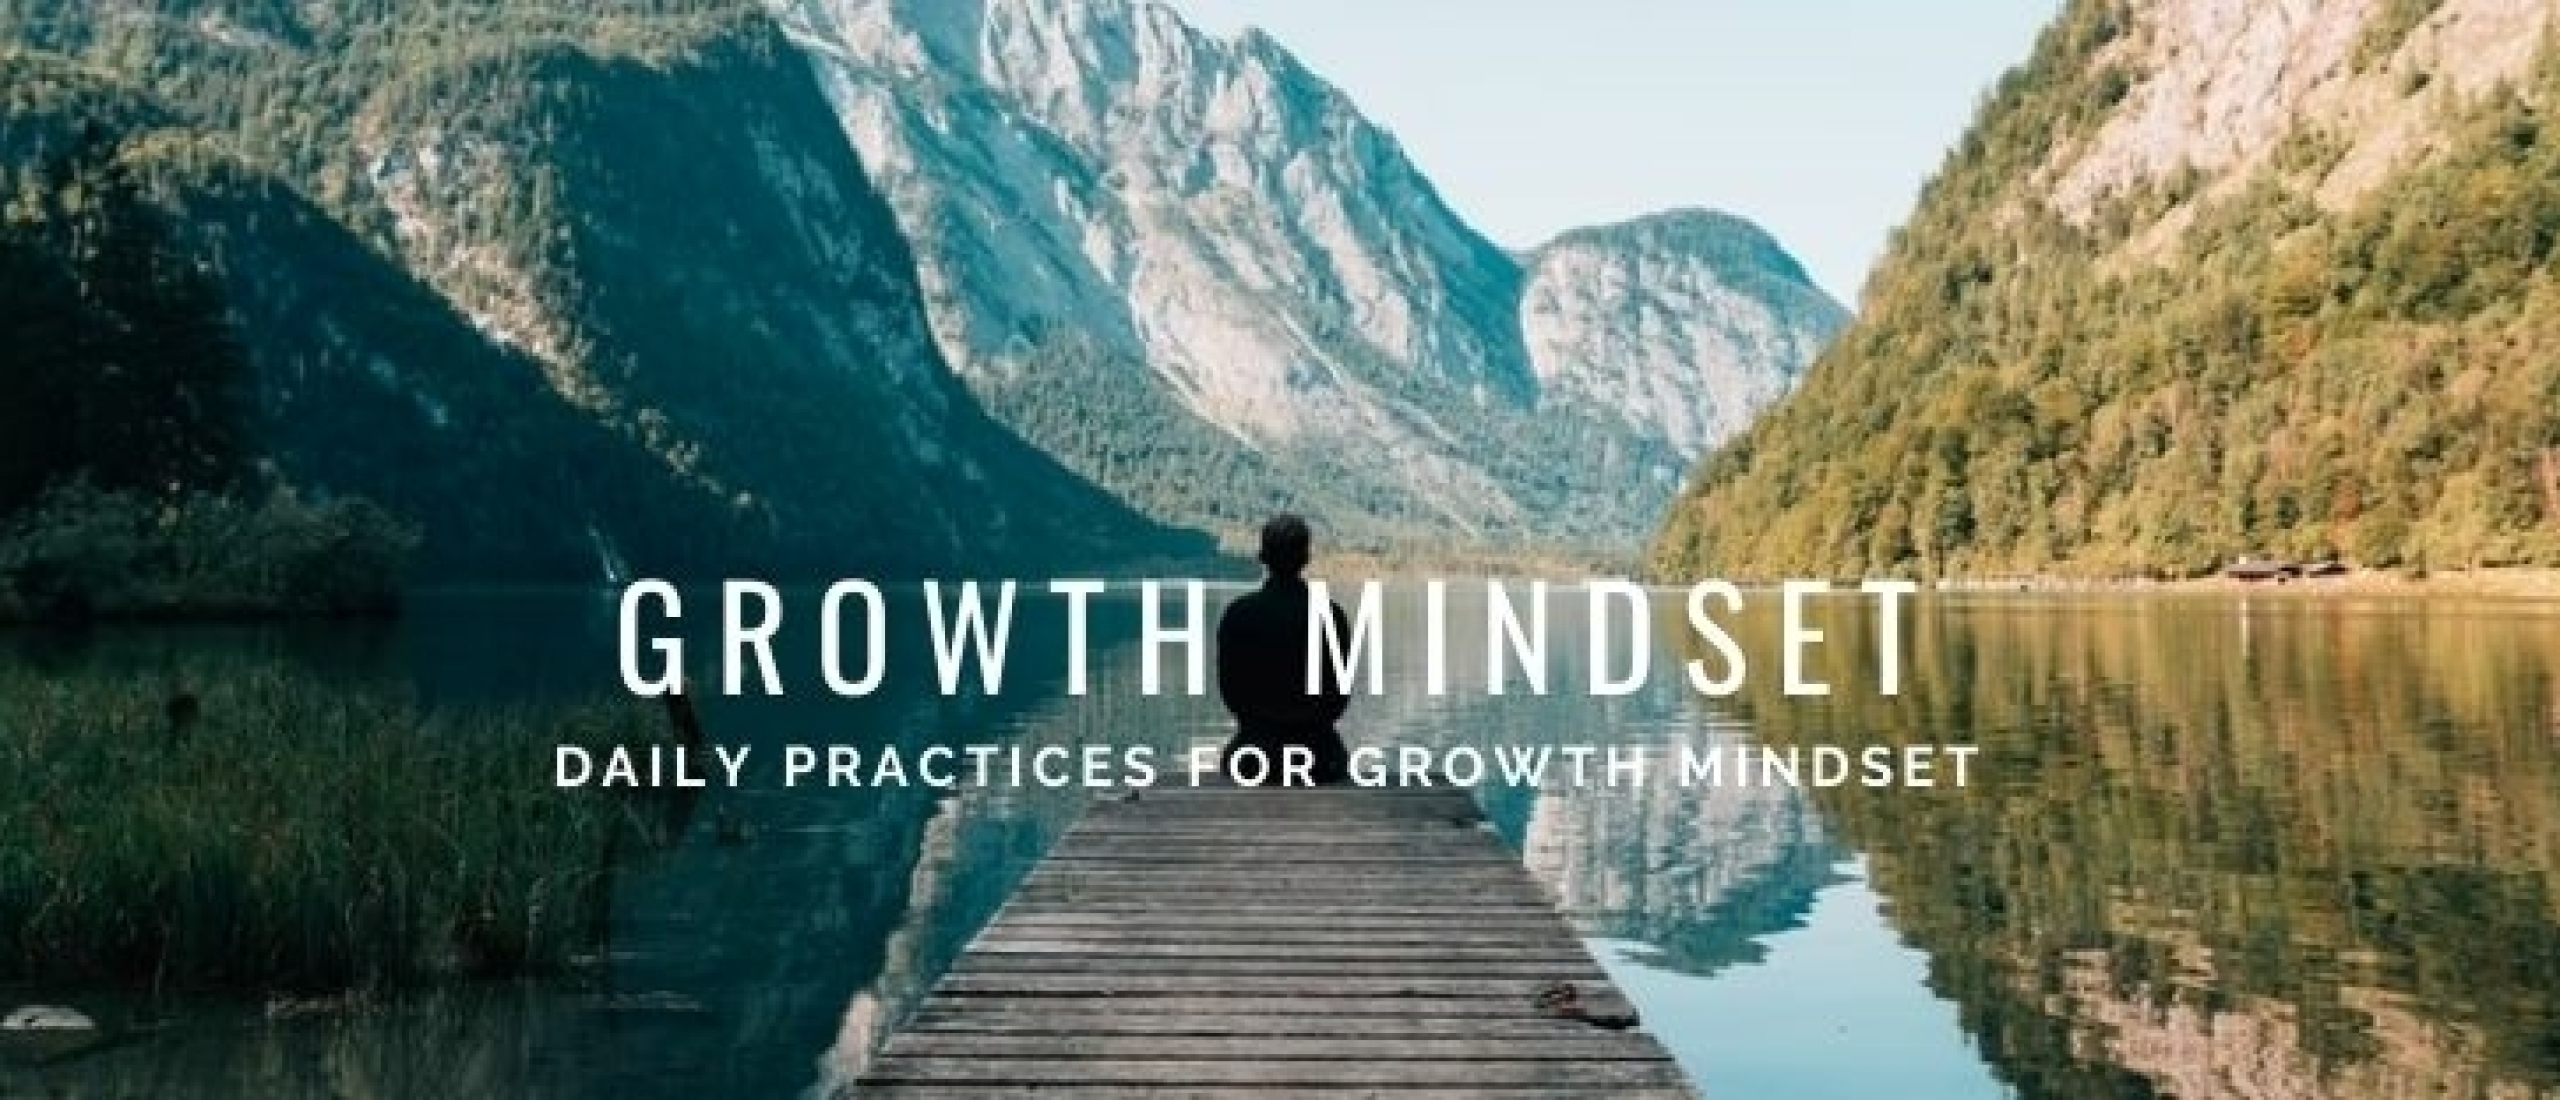 8 Daily Practices for Growth Mindset (Development)